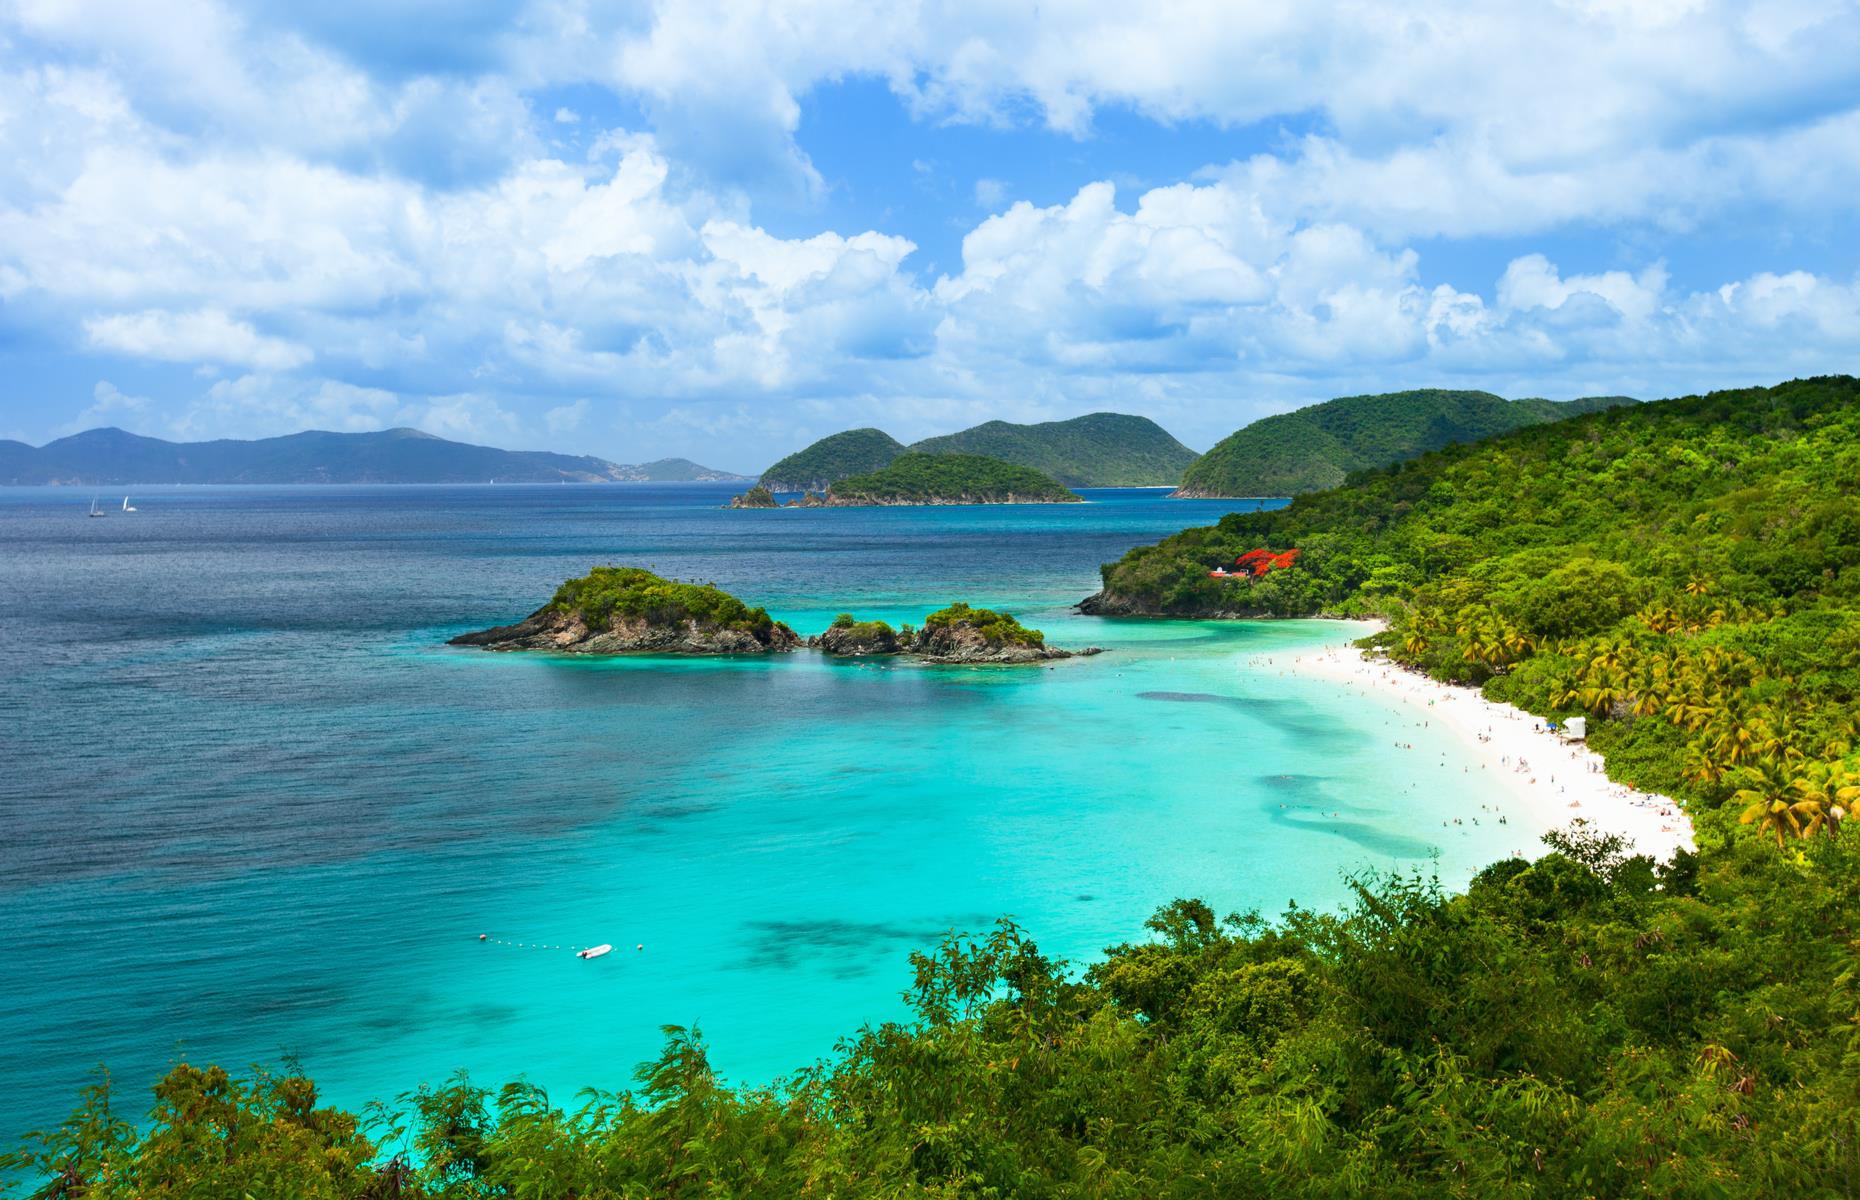 <p>Any of the three US Virgin Islands – St Thomas, St Croix and St John (pictured) – are idyllic destinations for an off-season escape. The islands have <a href="https://travel.usnews.com/US_Virgin_Islands/When_To_Visit/">average highs</a> ranging between 84°F (29°C) in January and 90°F (32°C) at the height of summer, so visitors are unlikely to ever feel cold. It’s best to avoid hurricane season (July-October) and visit in spring or November, when there tends to be better deals on flights and hotels and the islands are quieter.</p>